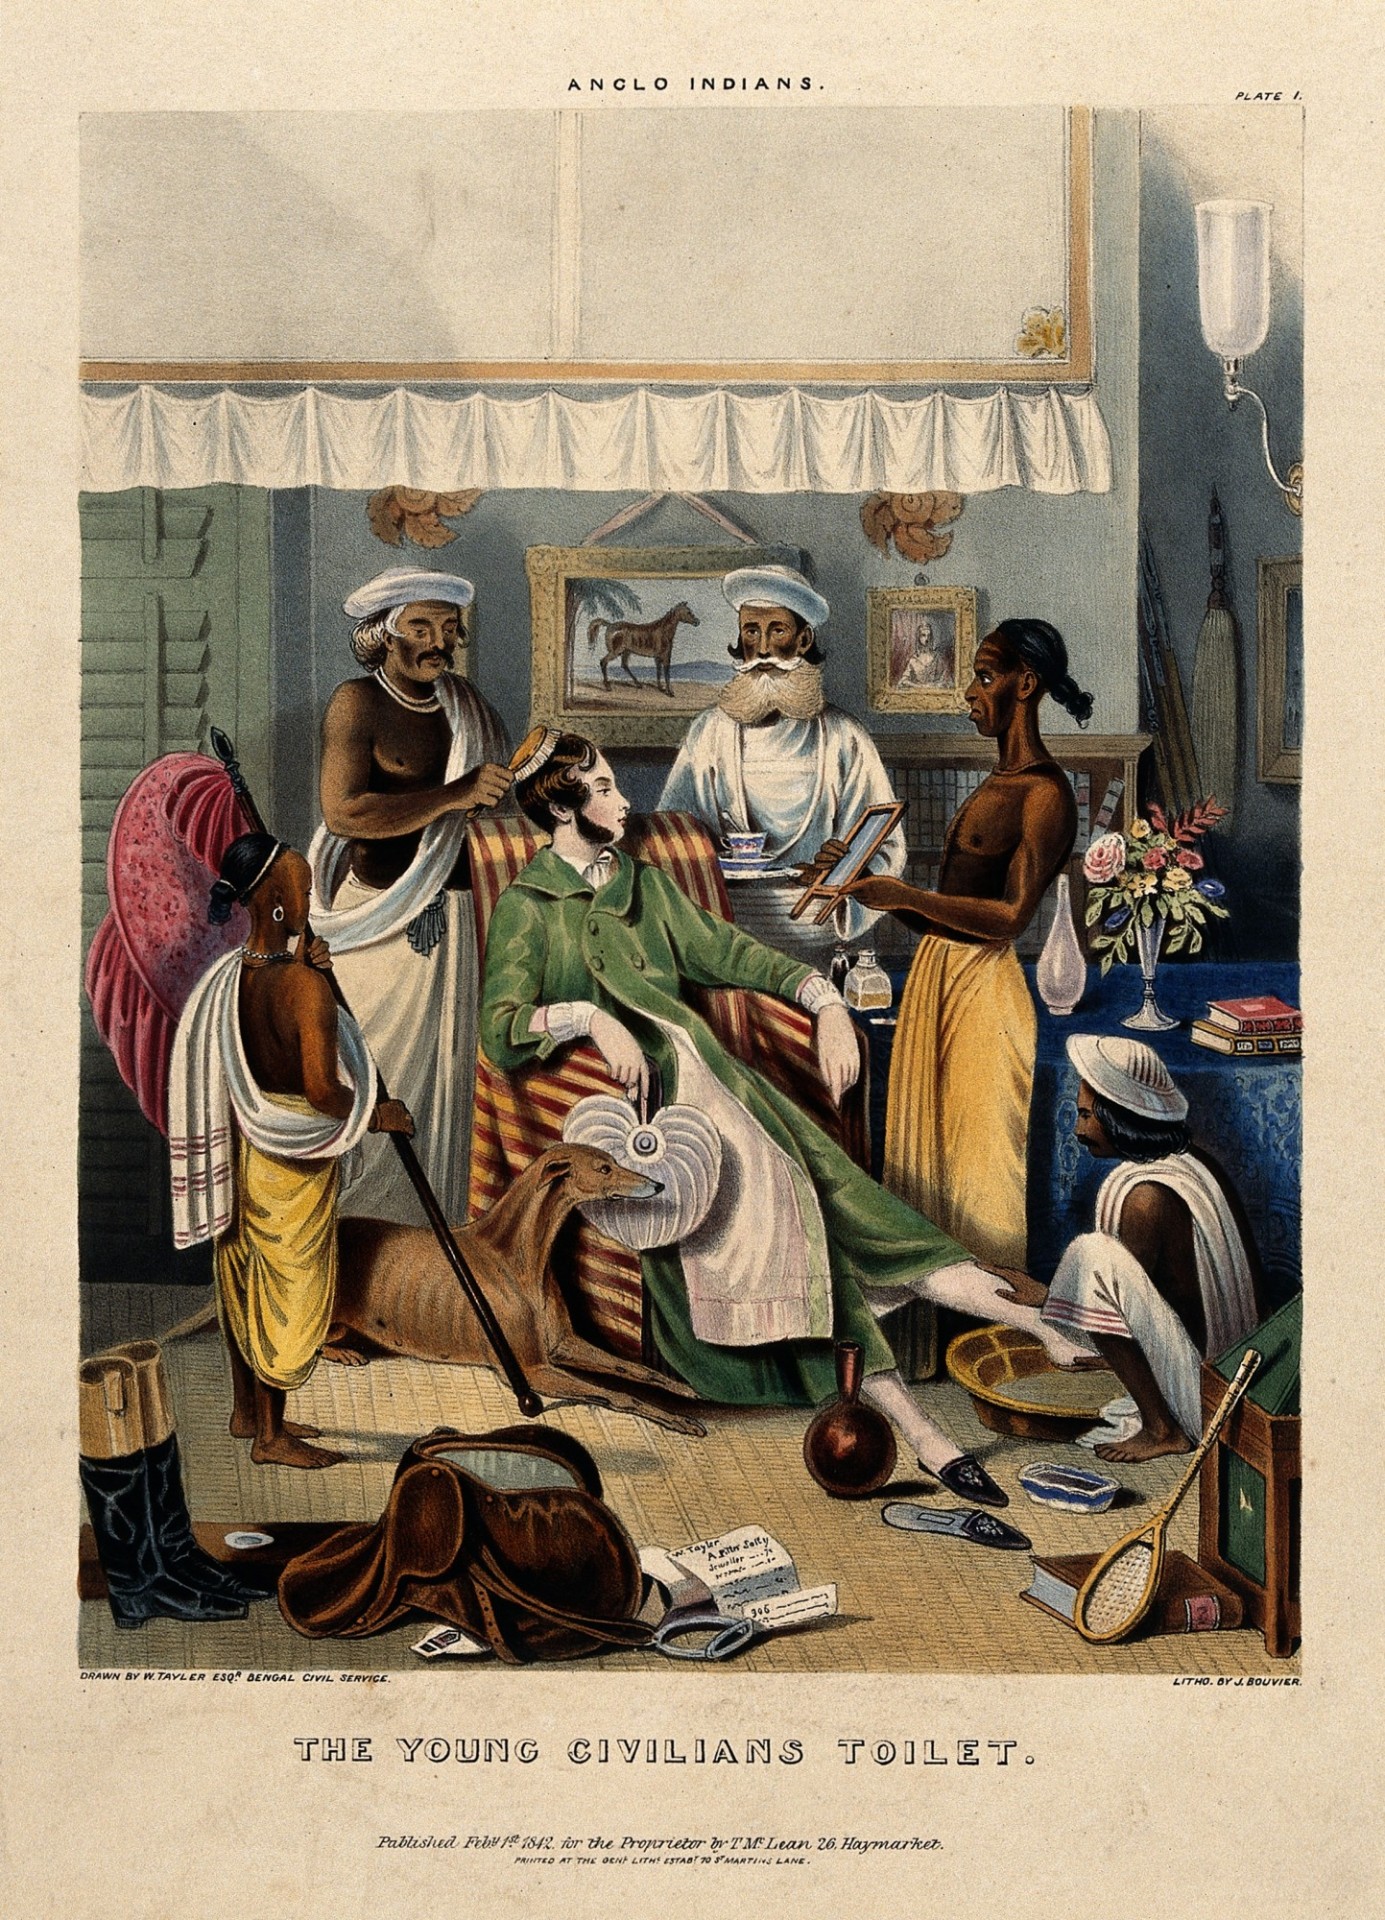 "A male Anglo-Indian being washed, dressed and attended by five Indian servants." Coloured lithograph by J. Bouvier, 1842, after W. Tayler. Source: Wikimedia Commons, CC BY 4.0.